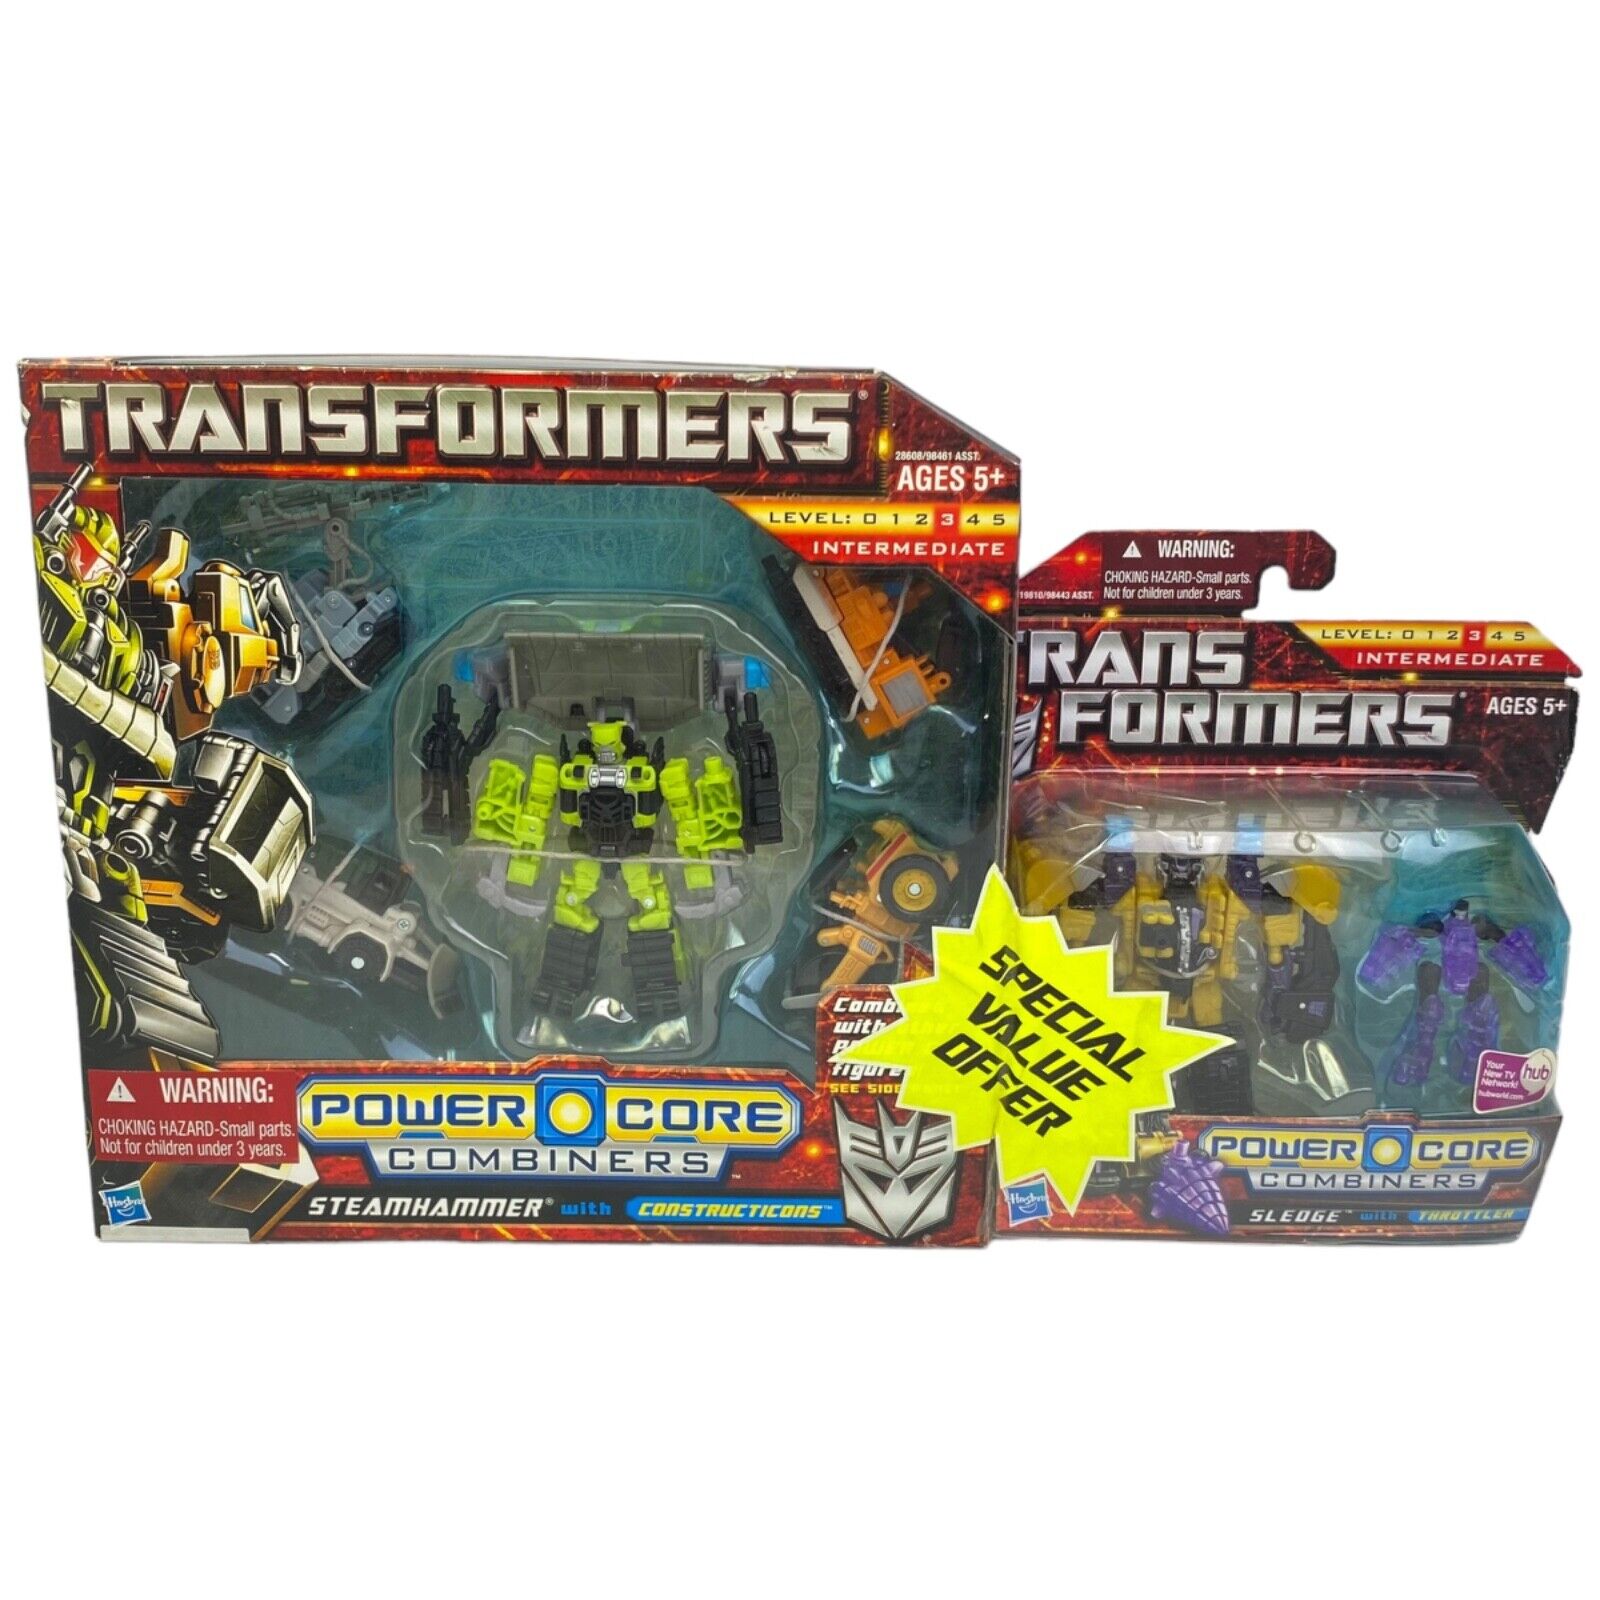 Transformers Power Core Combiners Steamhammer Construticons Sledge Value Pack